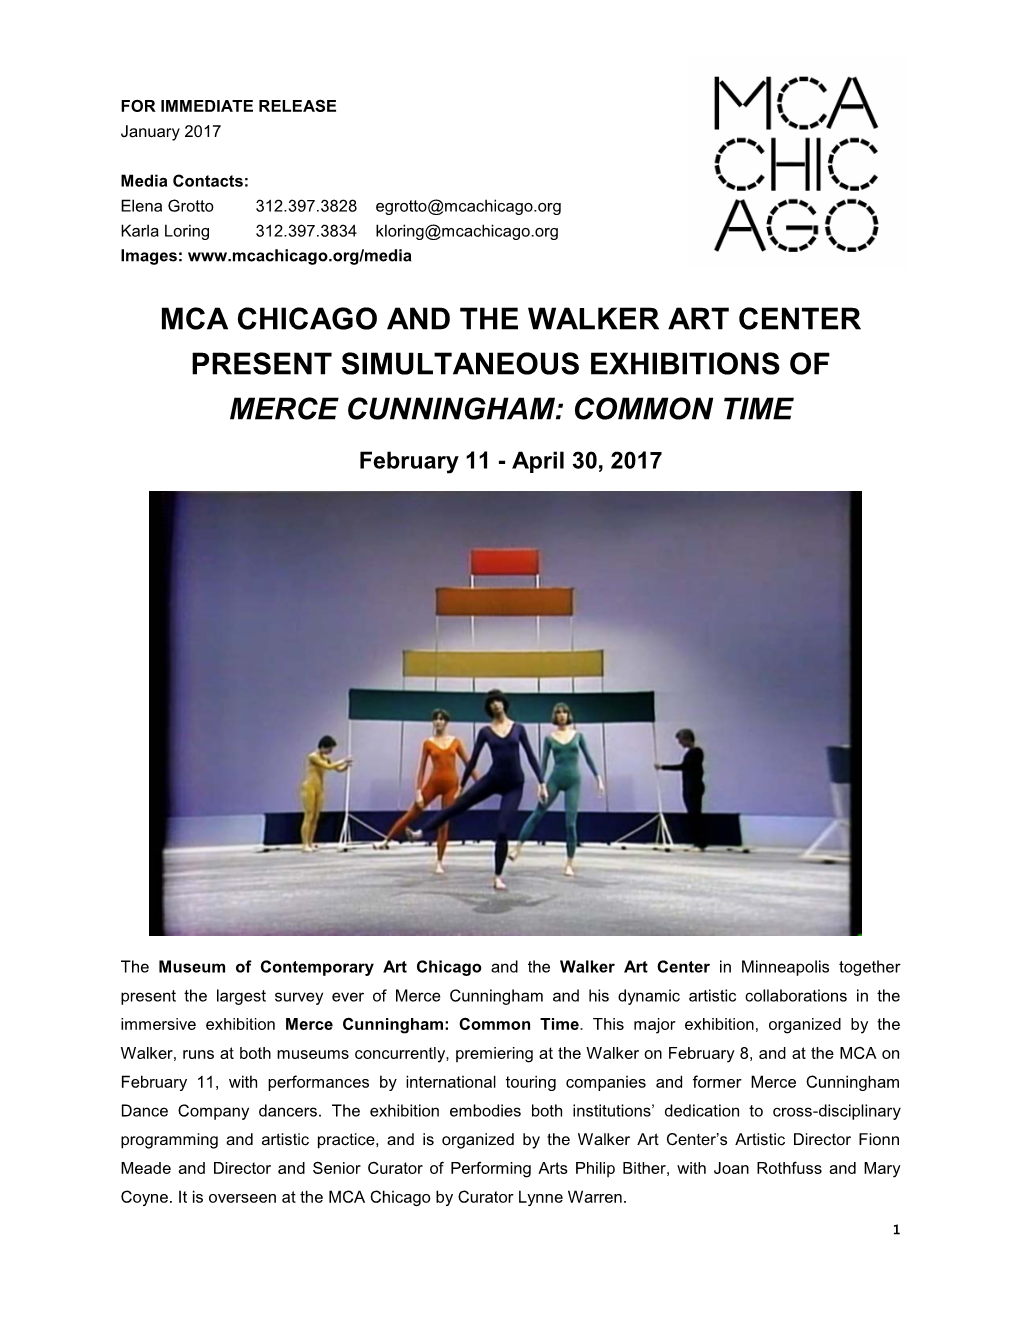 Mca Chicago and the Walker Art Center Present Simultaneous Exhibitions of Merce Cunningham: Common Time